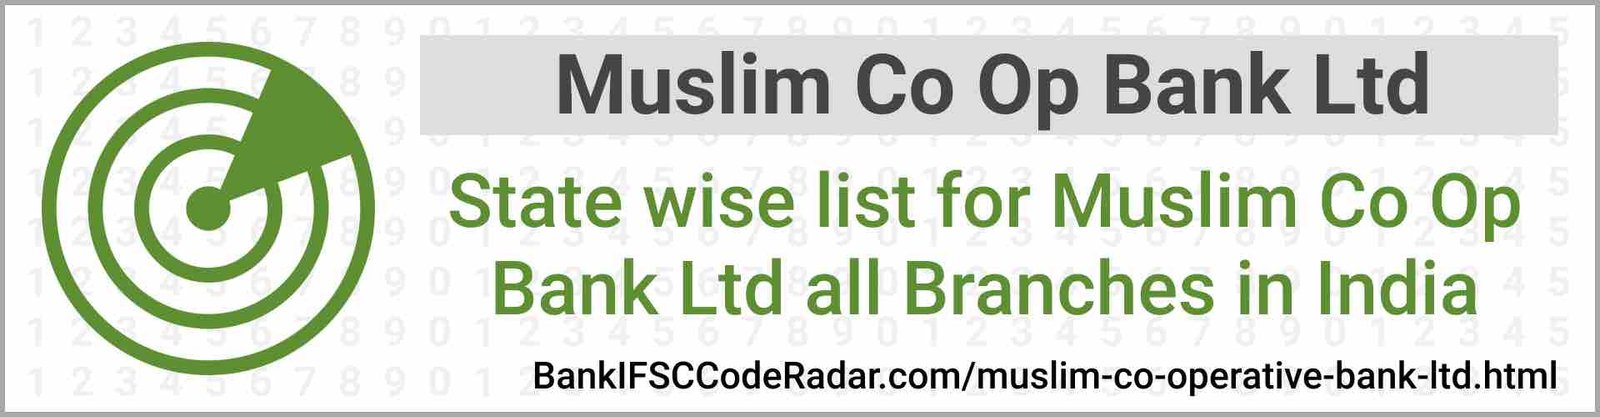 Muslim Co Operative Bank Ltd All Branches India